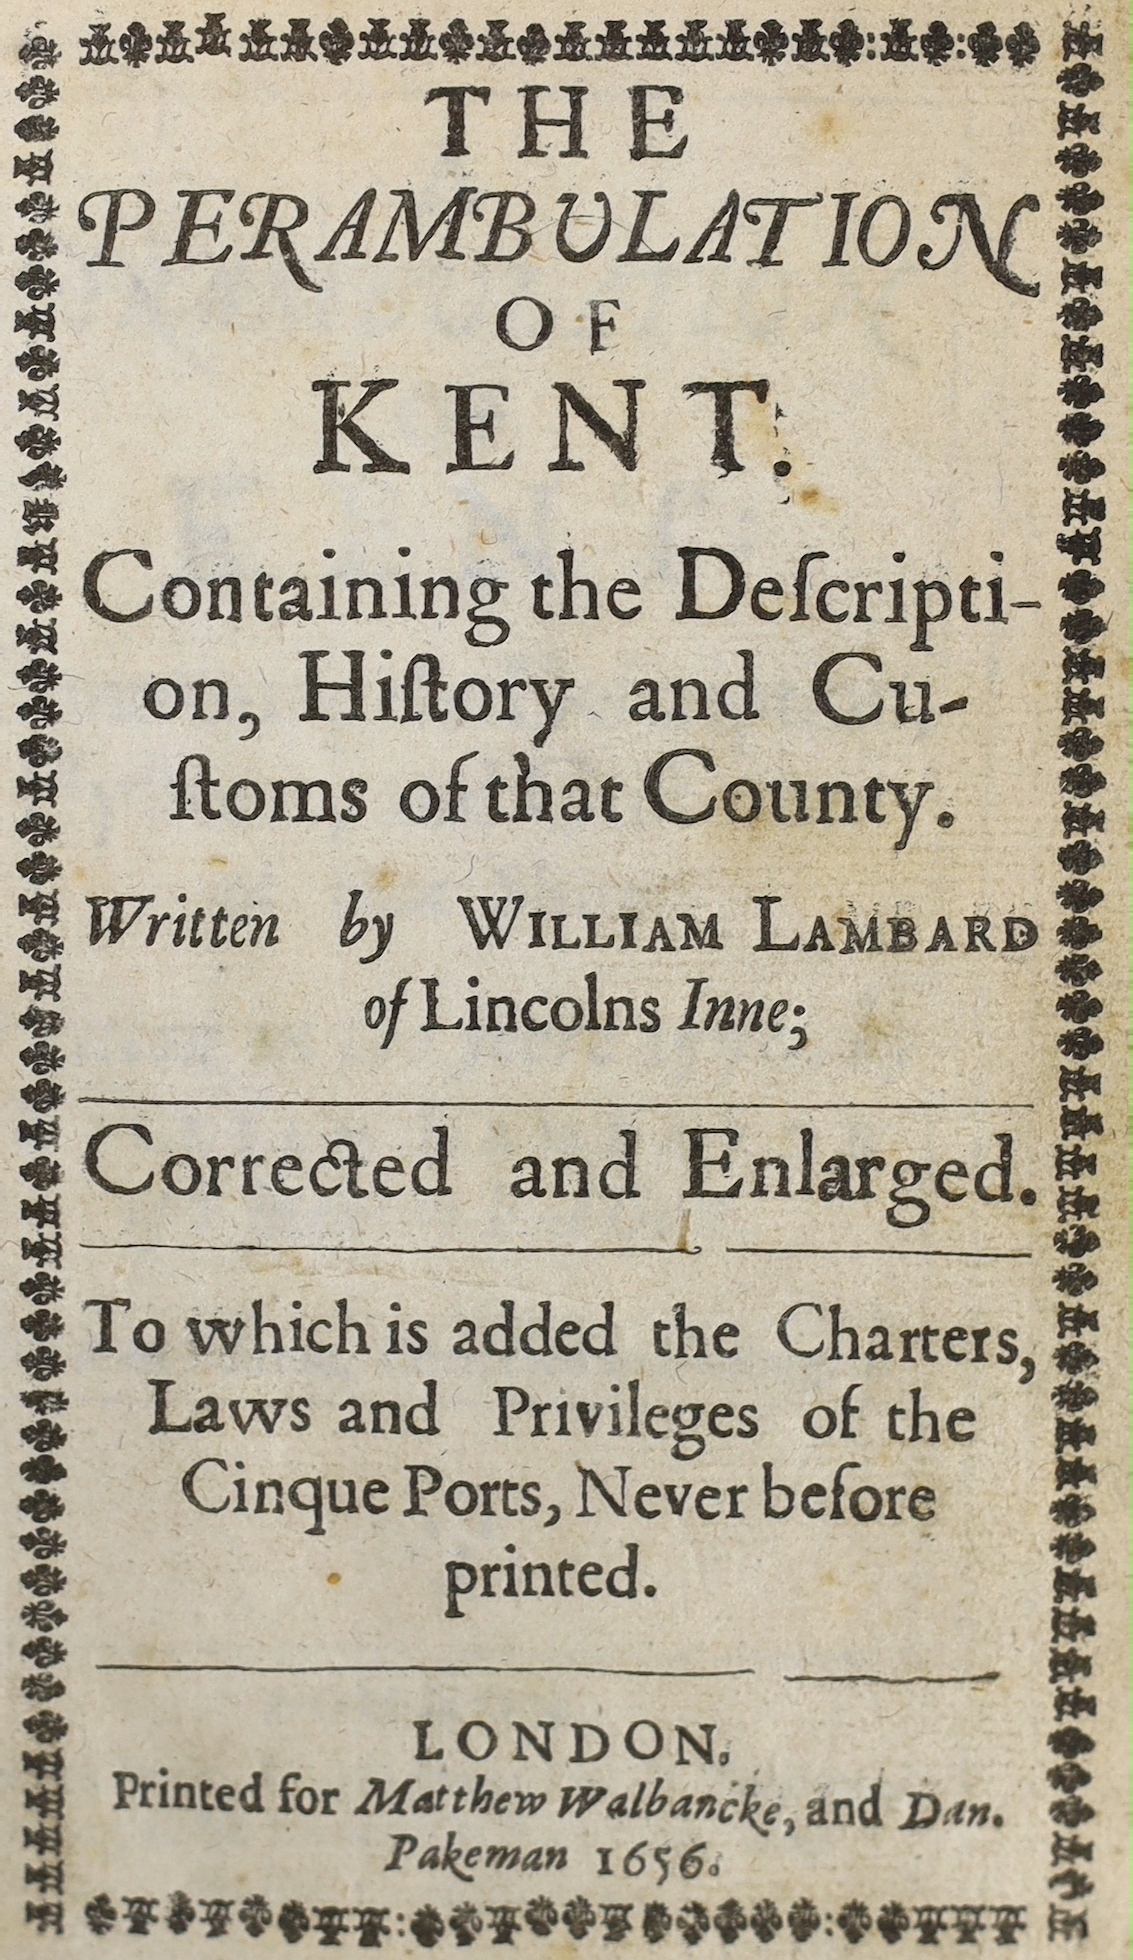 Lambarde, William - The Perambulation of Kent ... (5th edition), corrected and enlarged. To which is added the Charters, Laws and Privileges of the Cinque Ports ... old blind ruled calf, sometime rebacked with gilt ruled